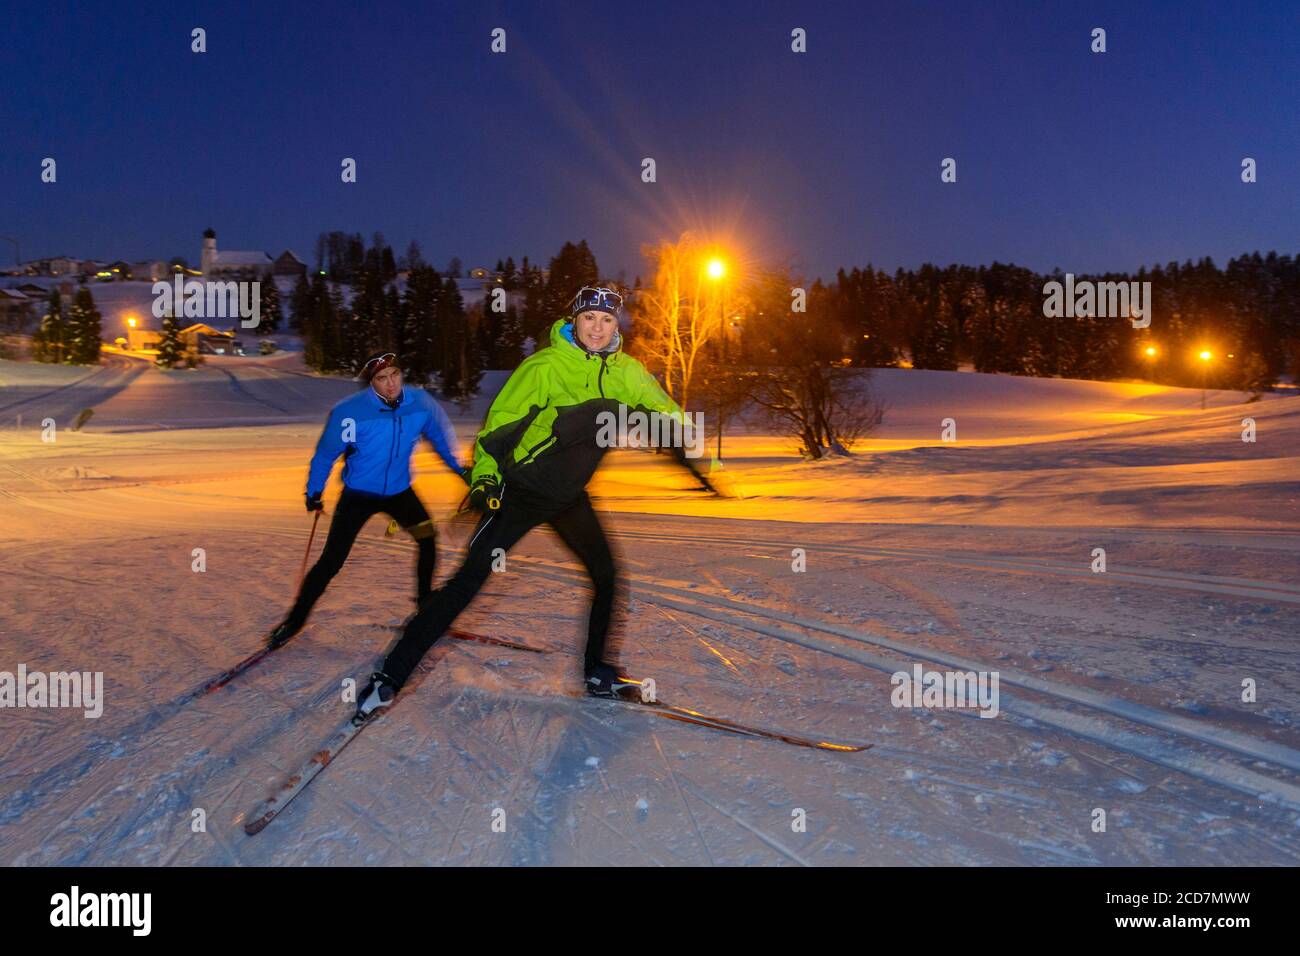 Two skiers doing a skating exercise on winter evening on floodlight slopes Stock Photo